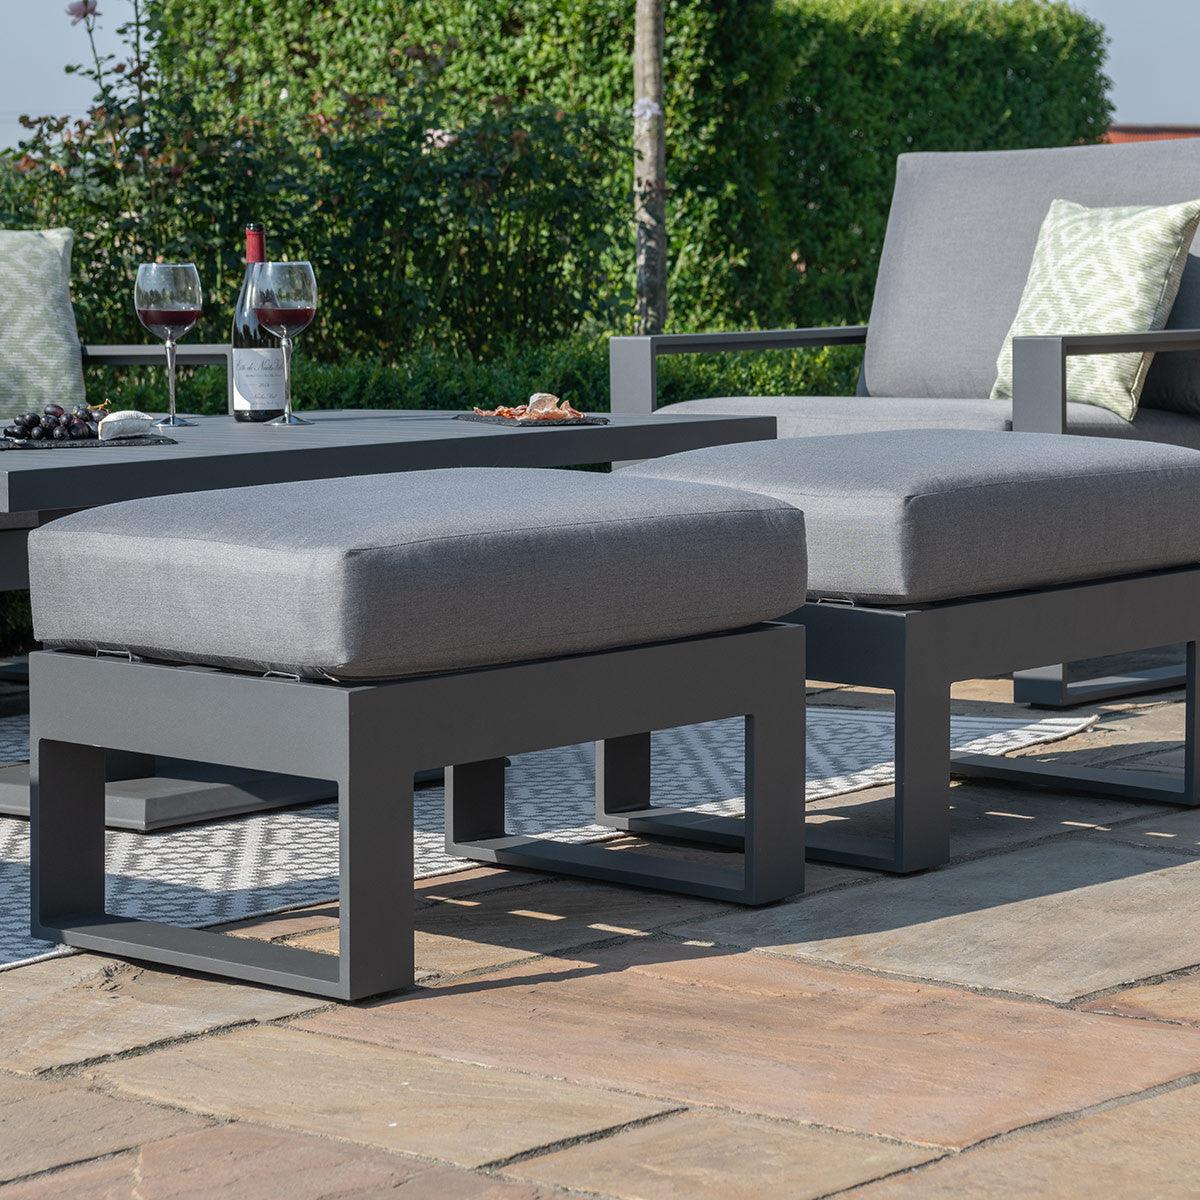 Amalfi 2 Seat Sofa Set With Rising Table - Vookoo Lifestyle